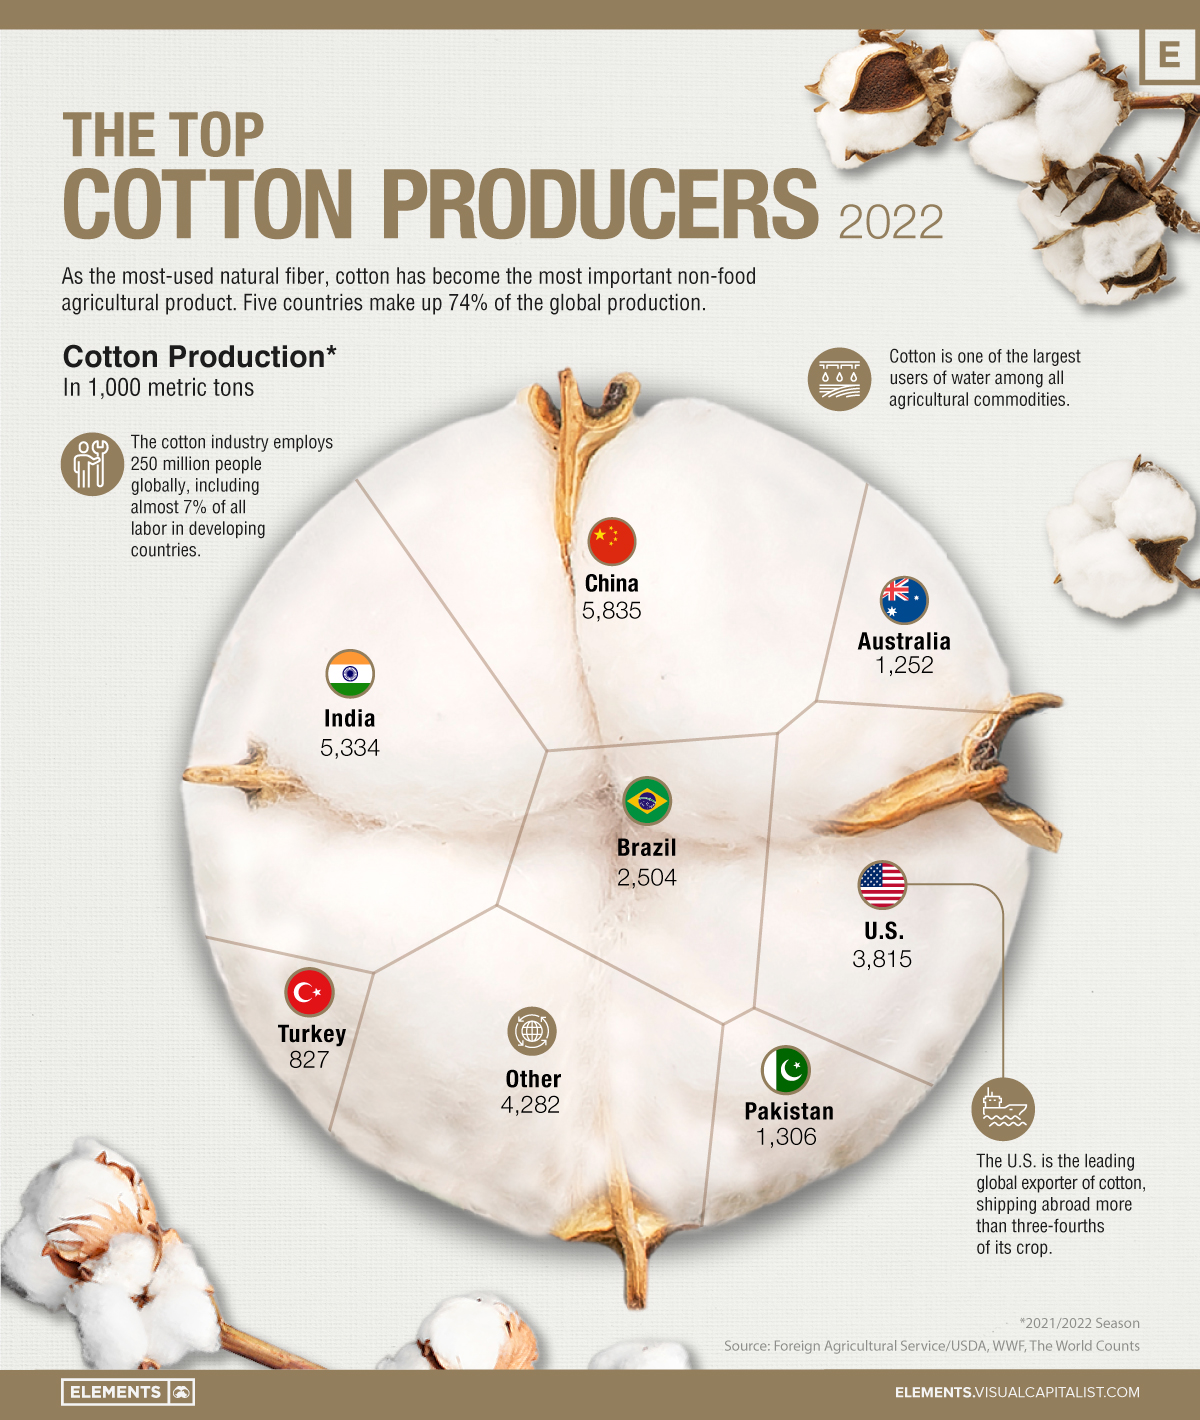 Ranked: The World’s Top Cotton Producers